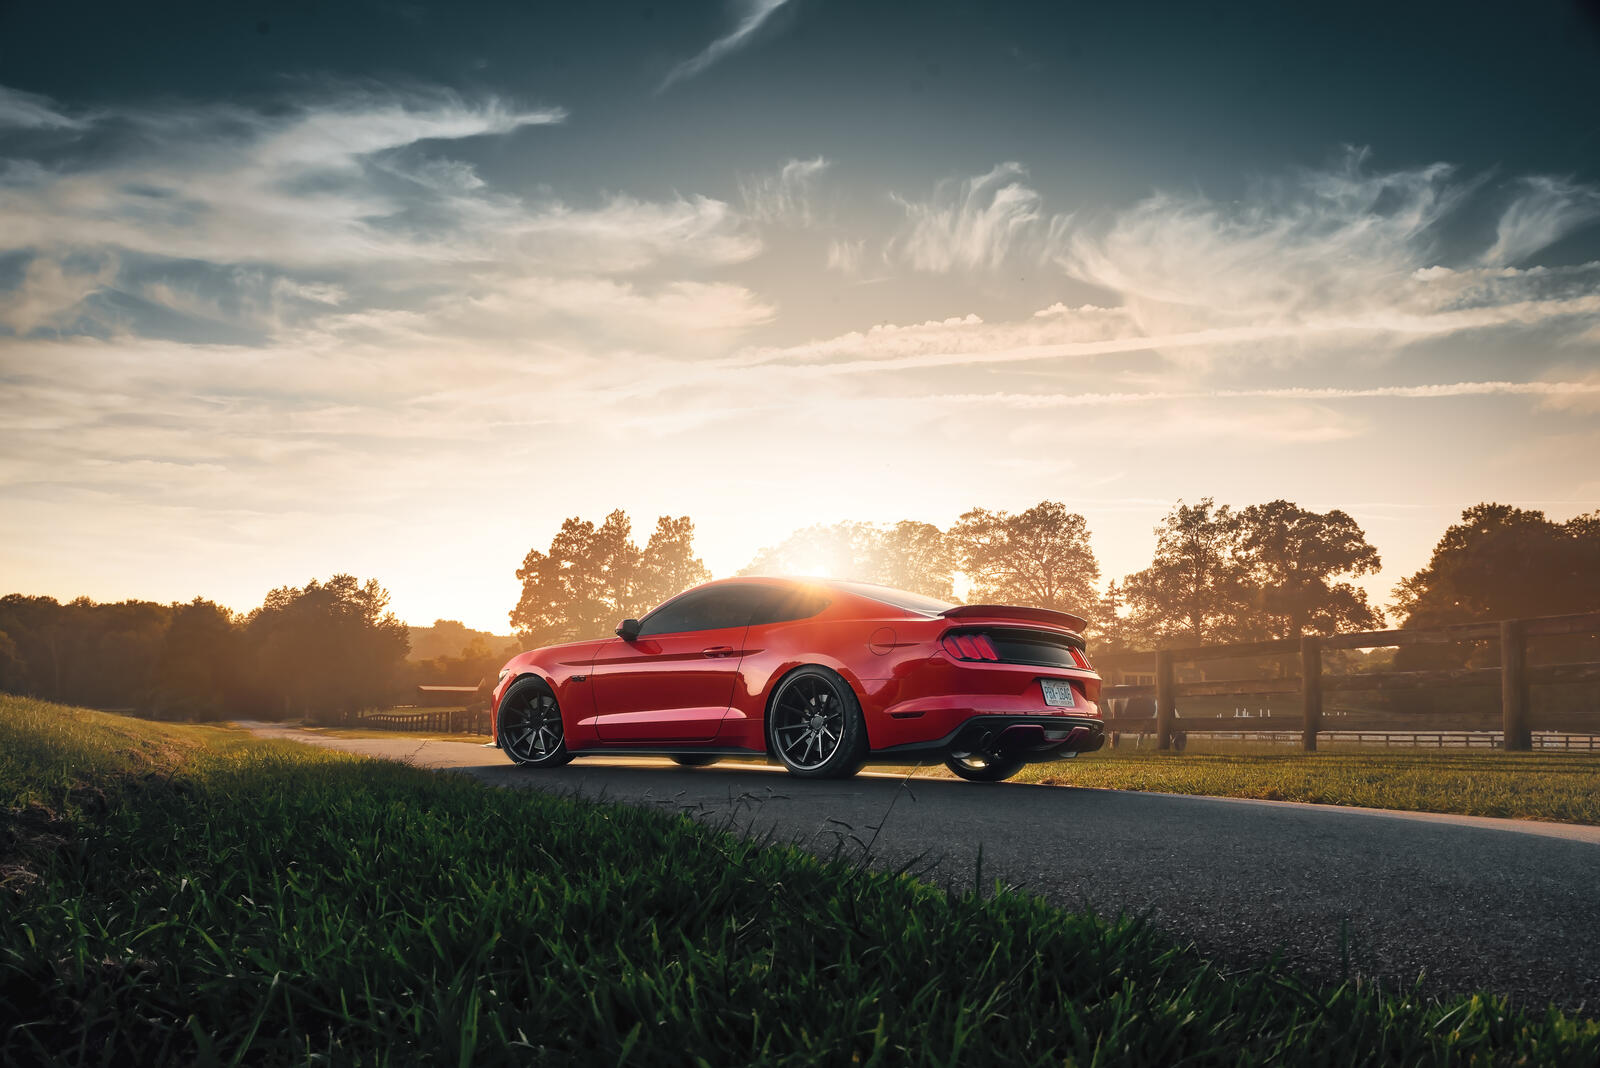 Wallpapers 2019 cars Ford Behance on the desktop